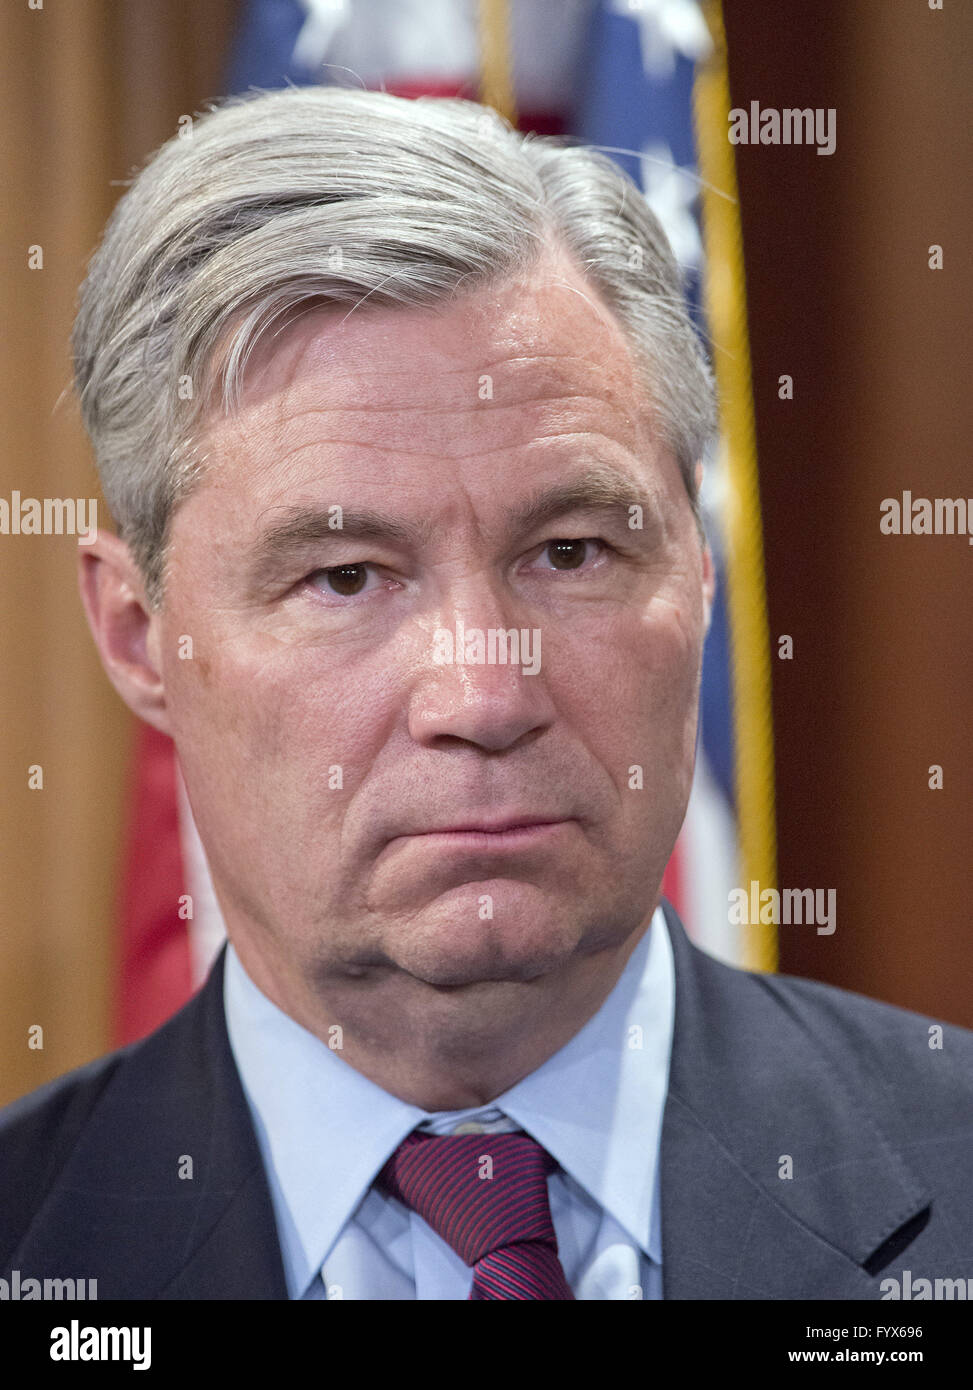 Washington, District of Columbia, USA. 28th Apr, 2016. United States Senator Sheldon Whitehouse (Republican of Rhode Island) appears at a press conference calling on the US Senate Republican leadership to bring to the floor the bipartisan Sentencing Reform and Corrections Act, a bill to reduce some mandatory minimum sentences and apply those changes retroactively to inmates currently serving unfair sentences.Credit: Ron Sachs/CNP Credit:  Ron Sachs/CNP/ZUMA Wire/Alamy Live News Stock Photo